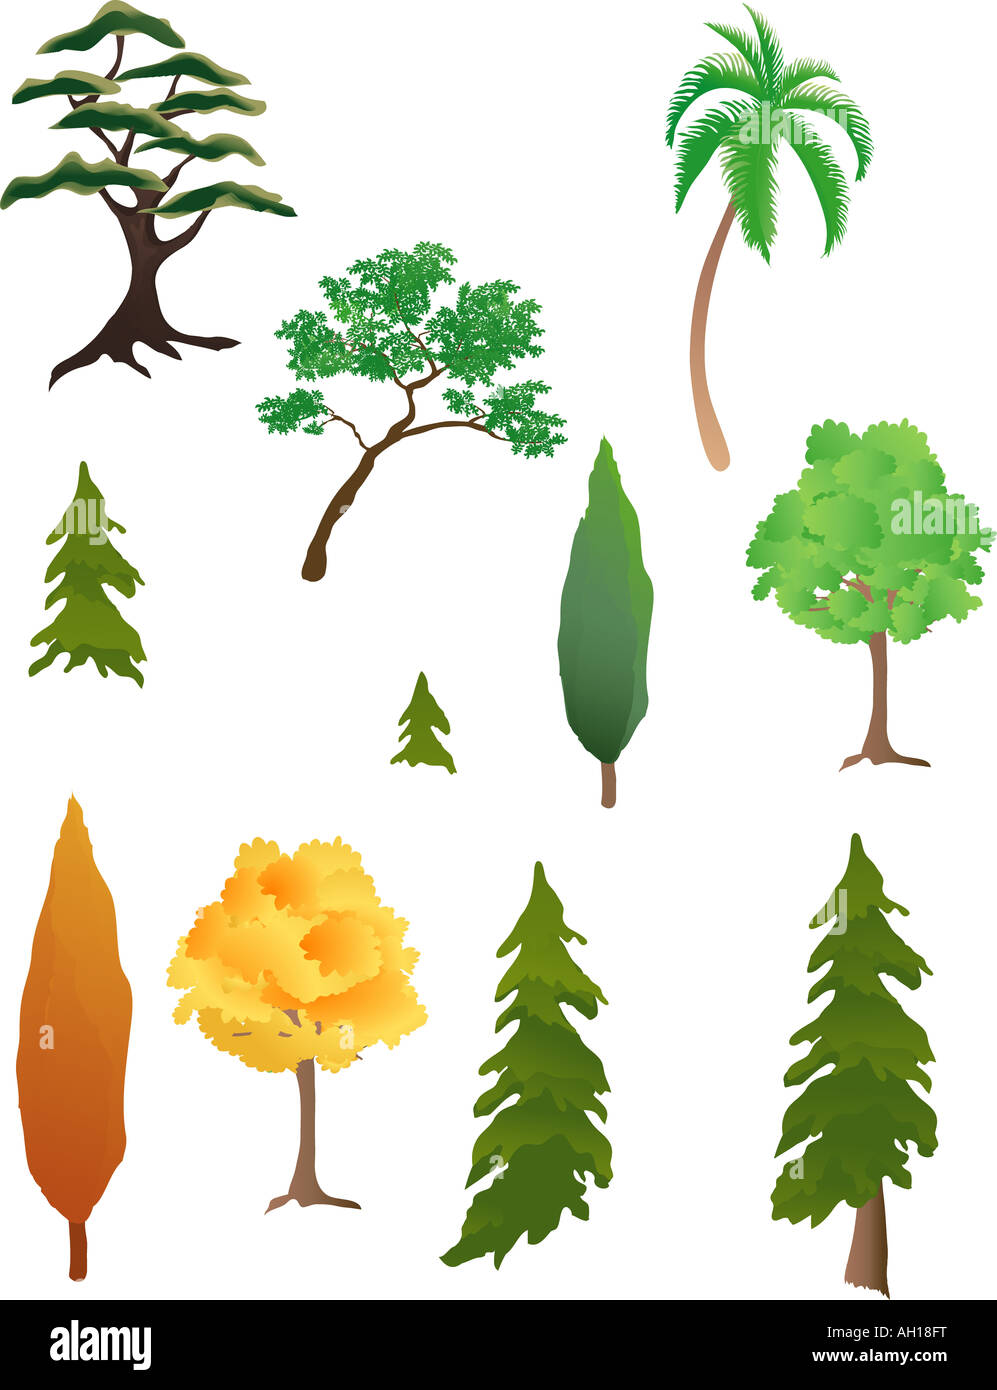 Trees for kind. Kinds of trees